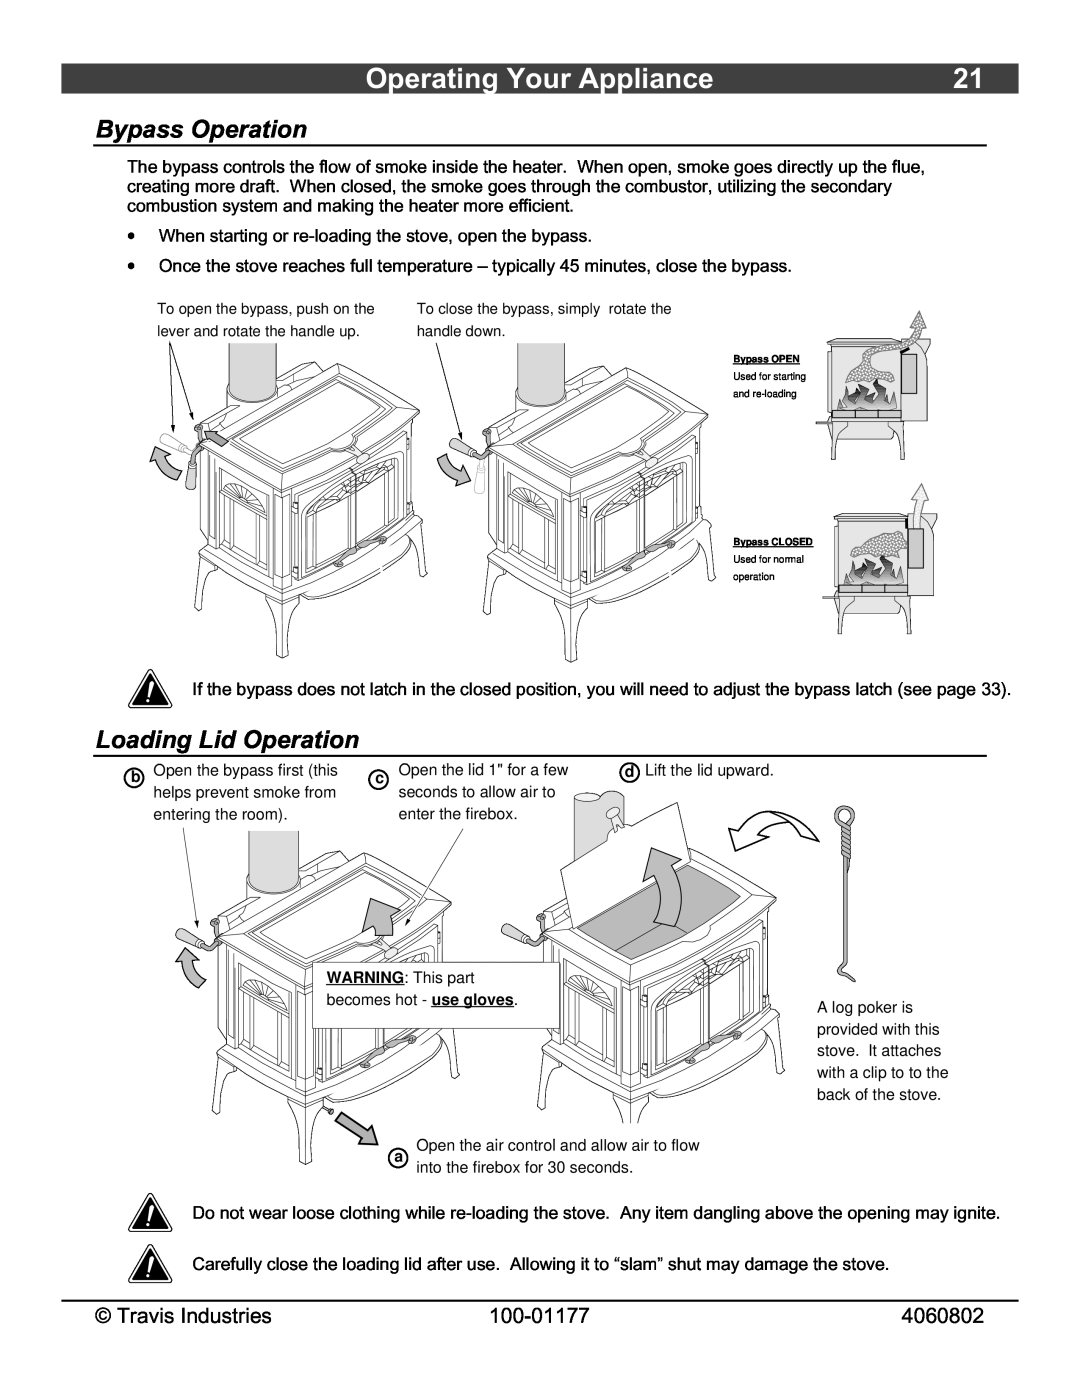 Lopi Stove owner manual Operating Your Appliance, Bypass Operation, Loading Lid Operation 